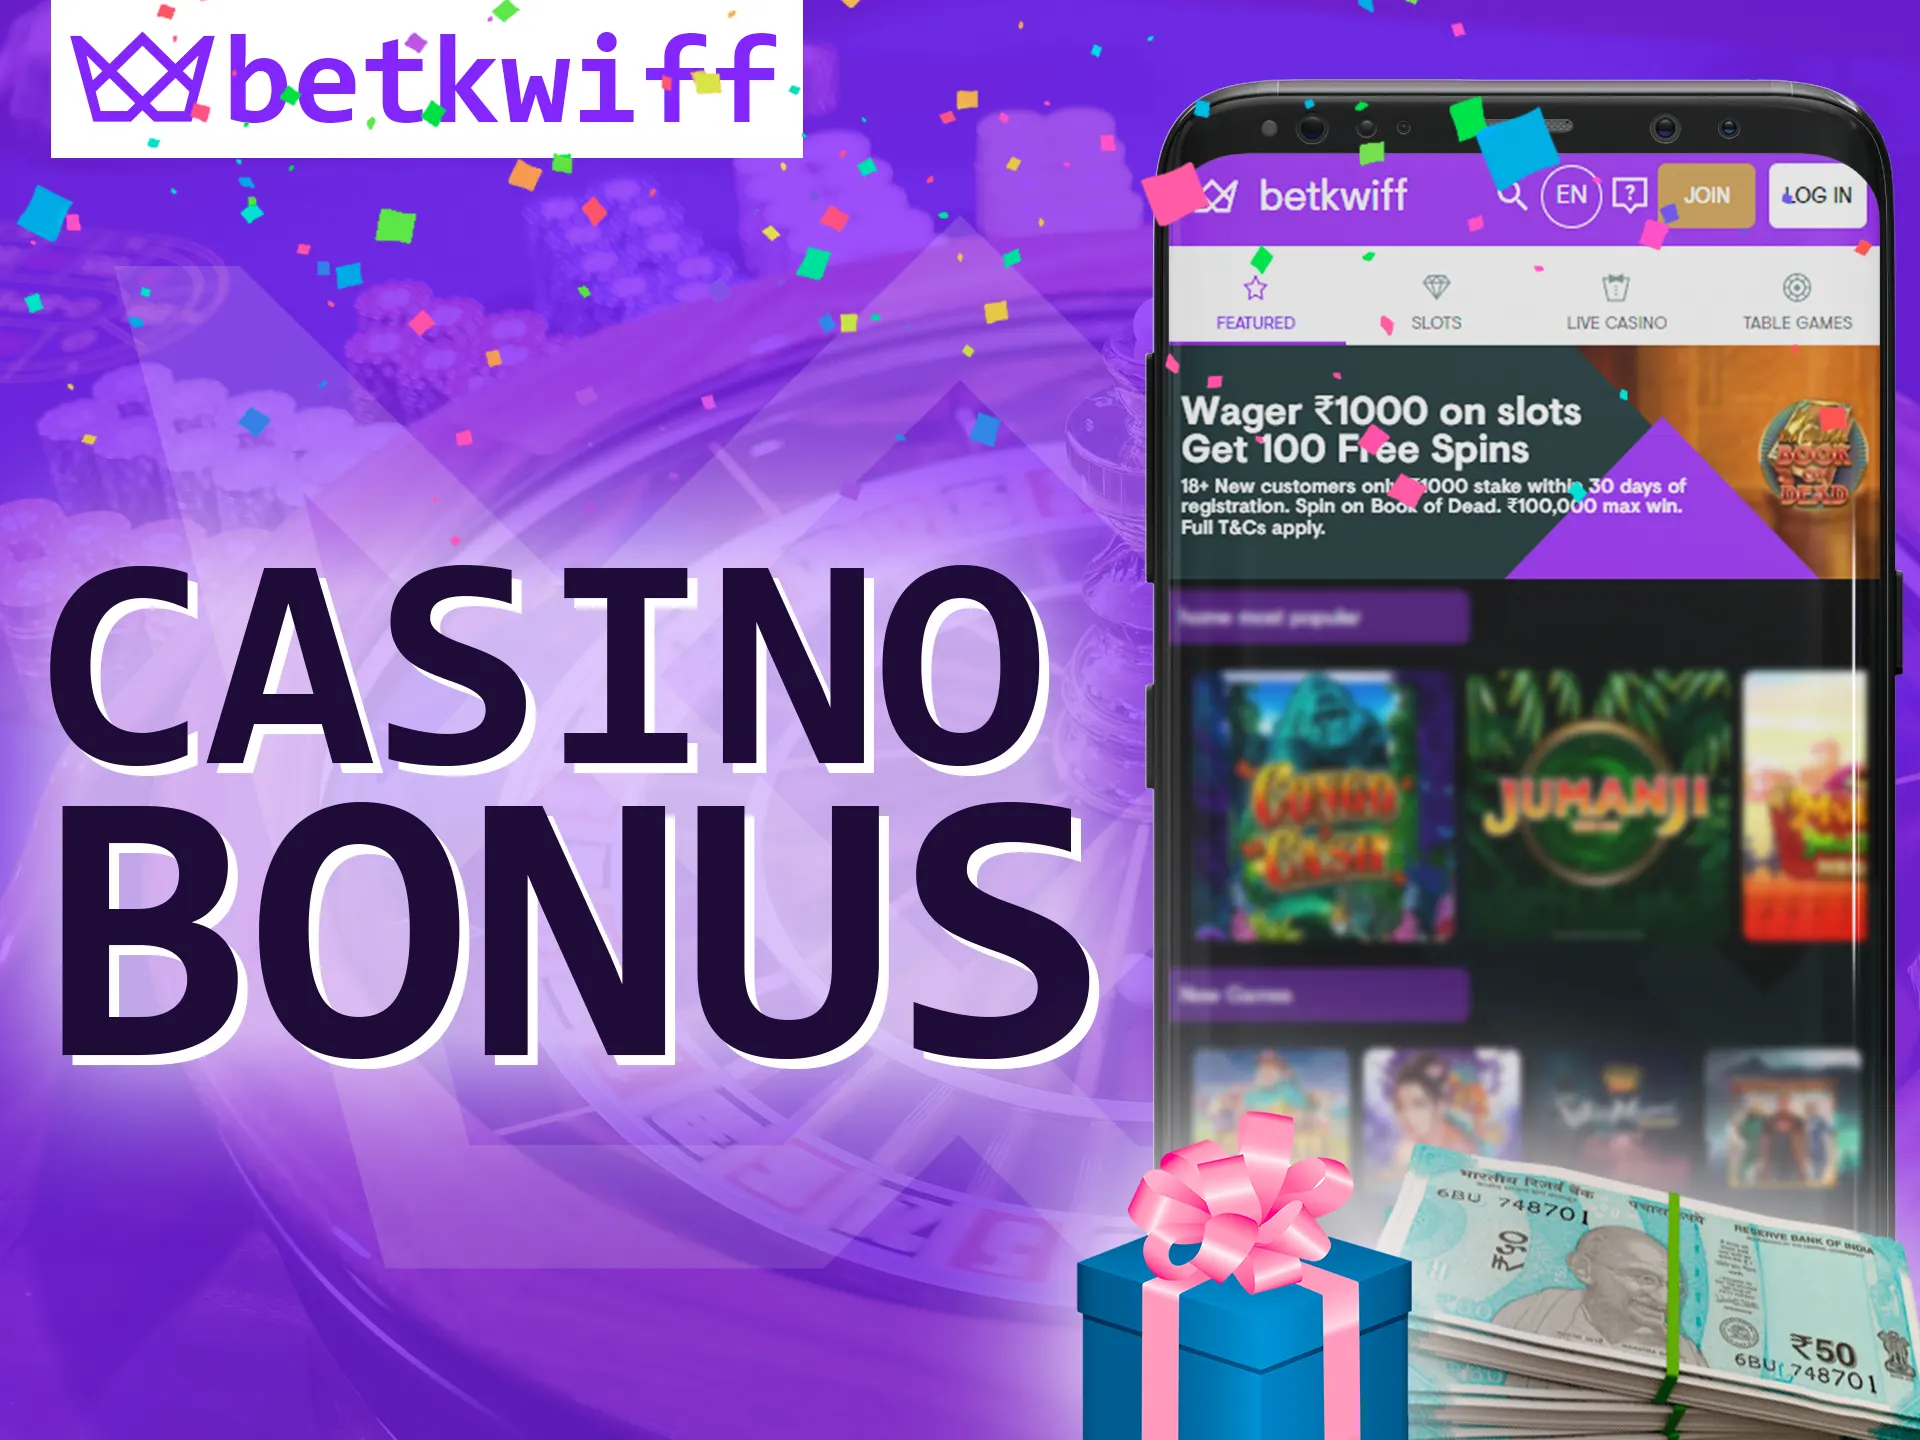 In the Betkwiff app, get a special bonus for casino games.